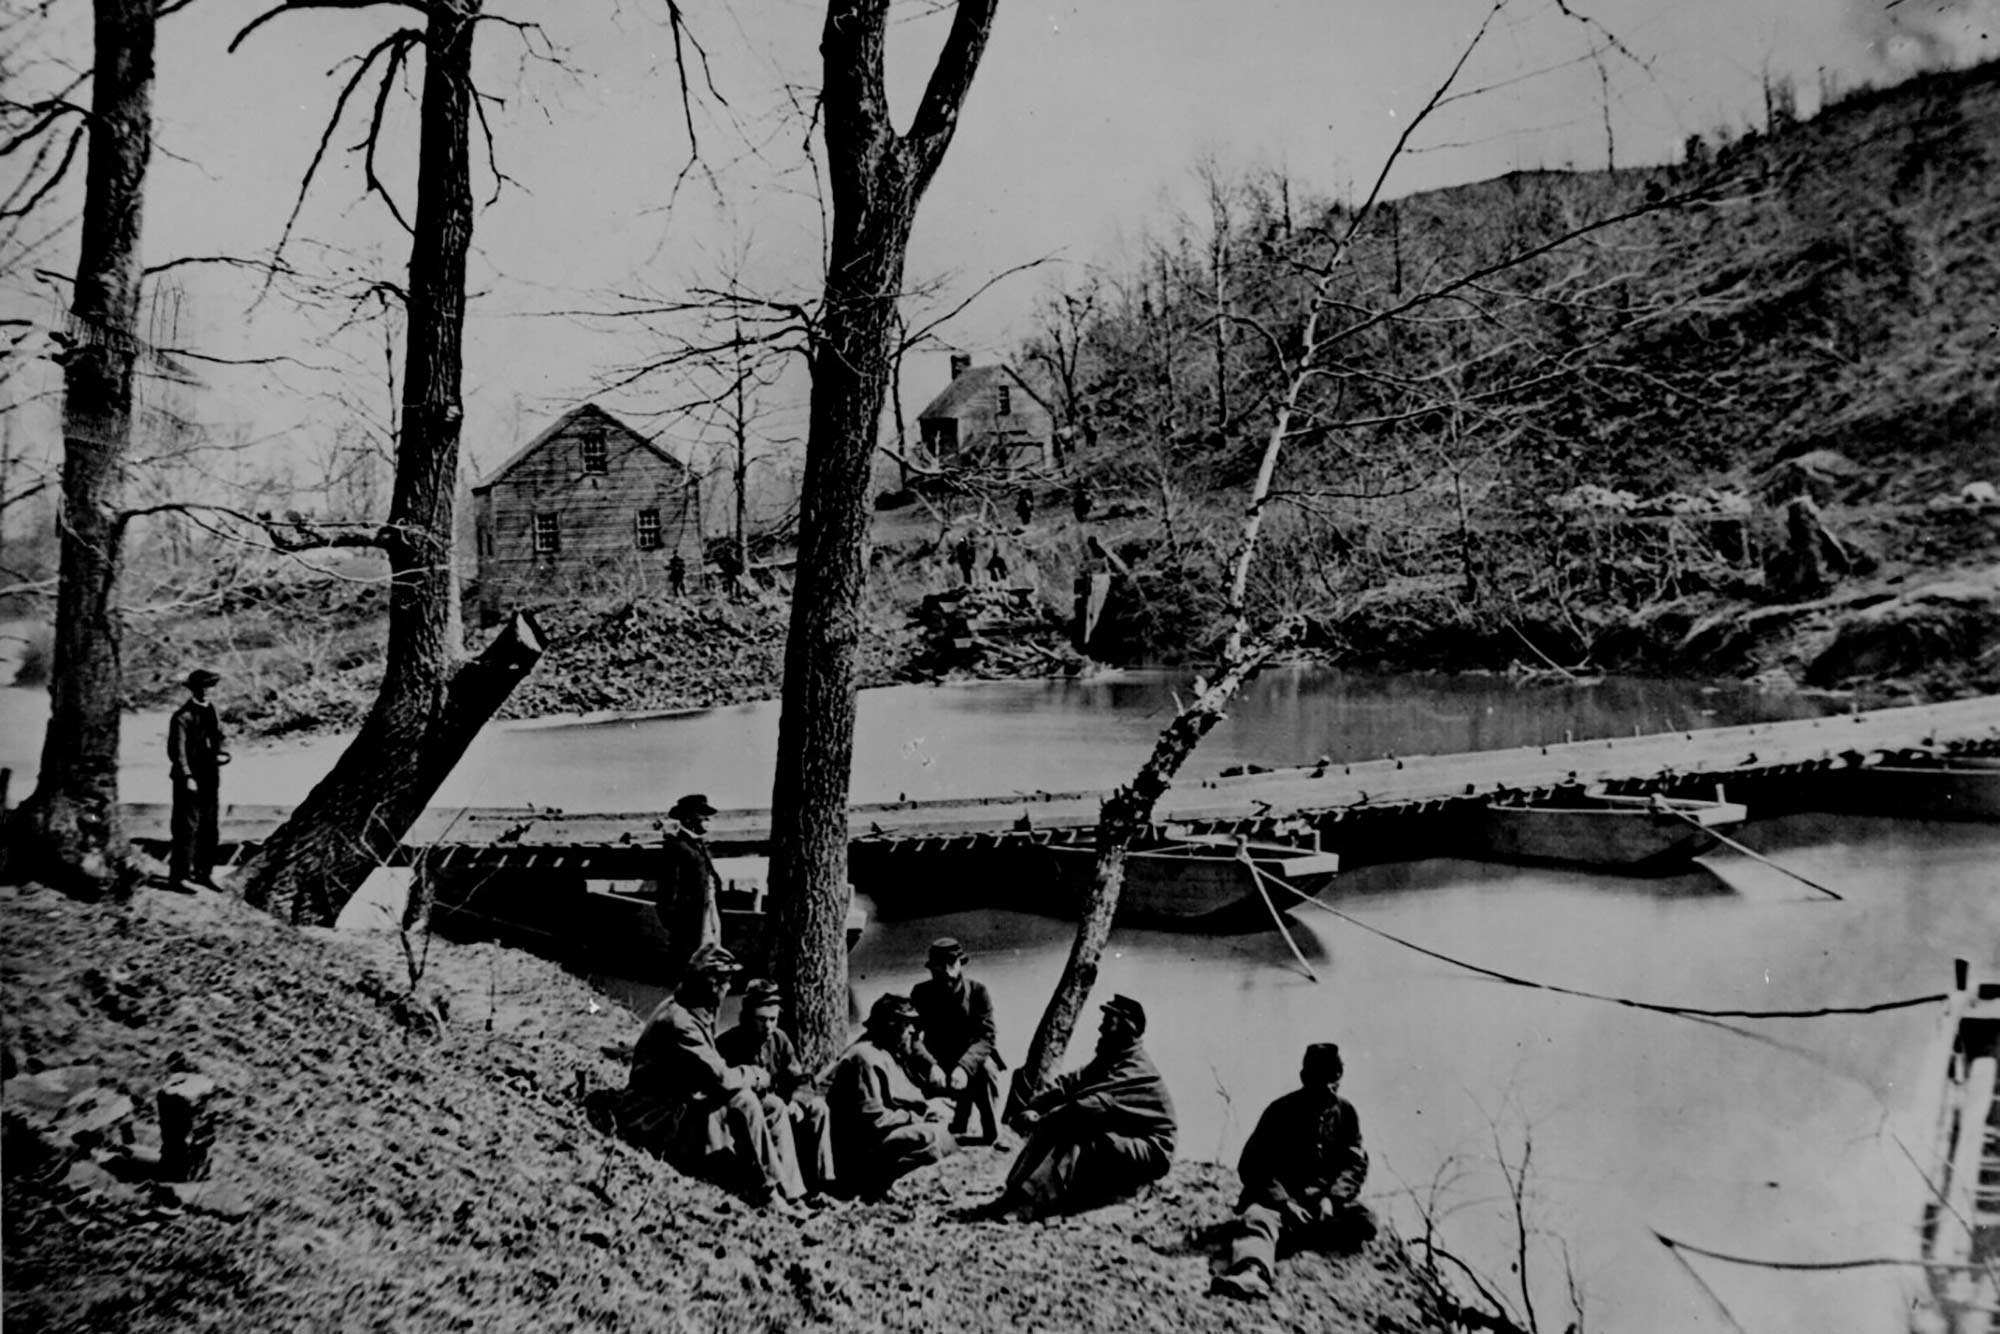 Black and white photo of A pontoon bridge at Bull Run, Virginia with soldiers sitting on bank